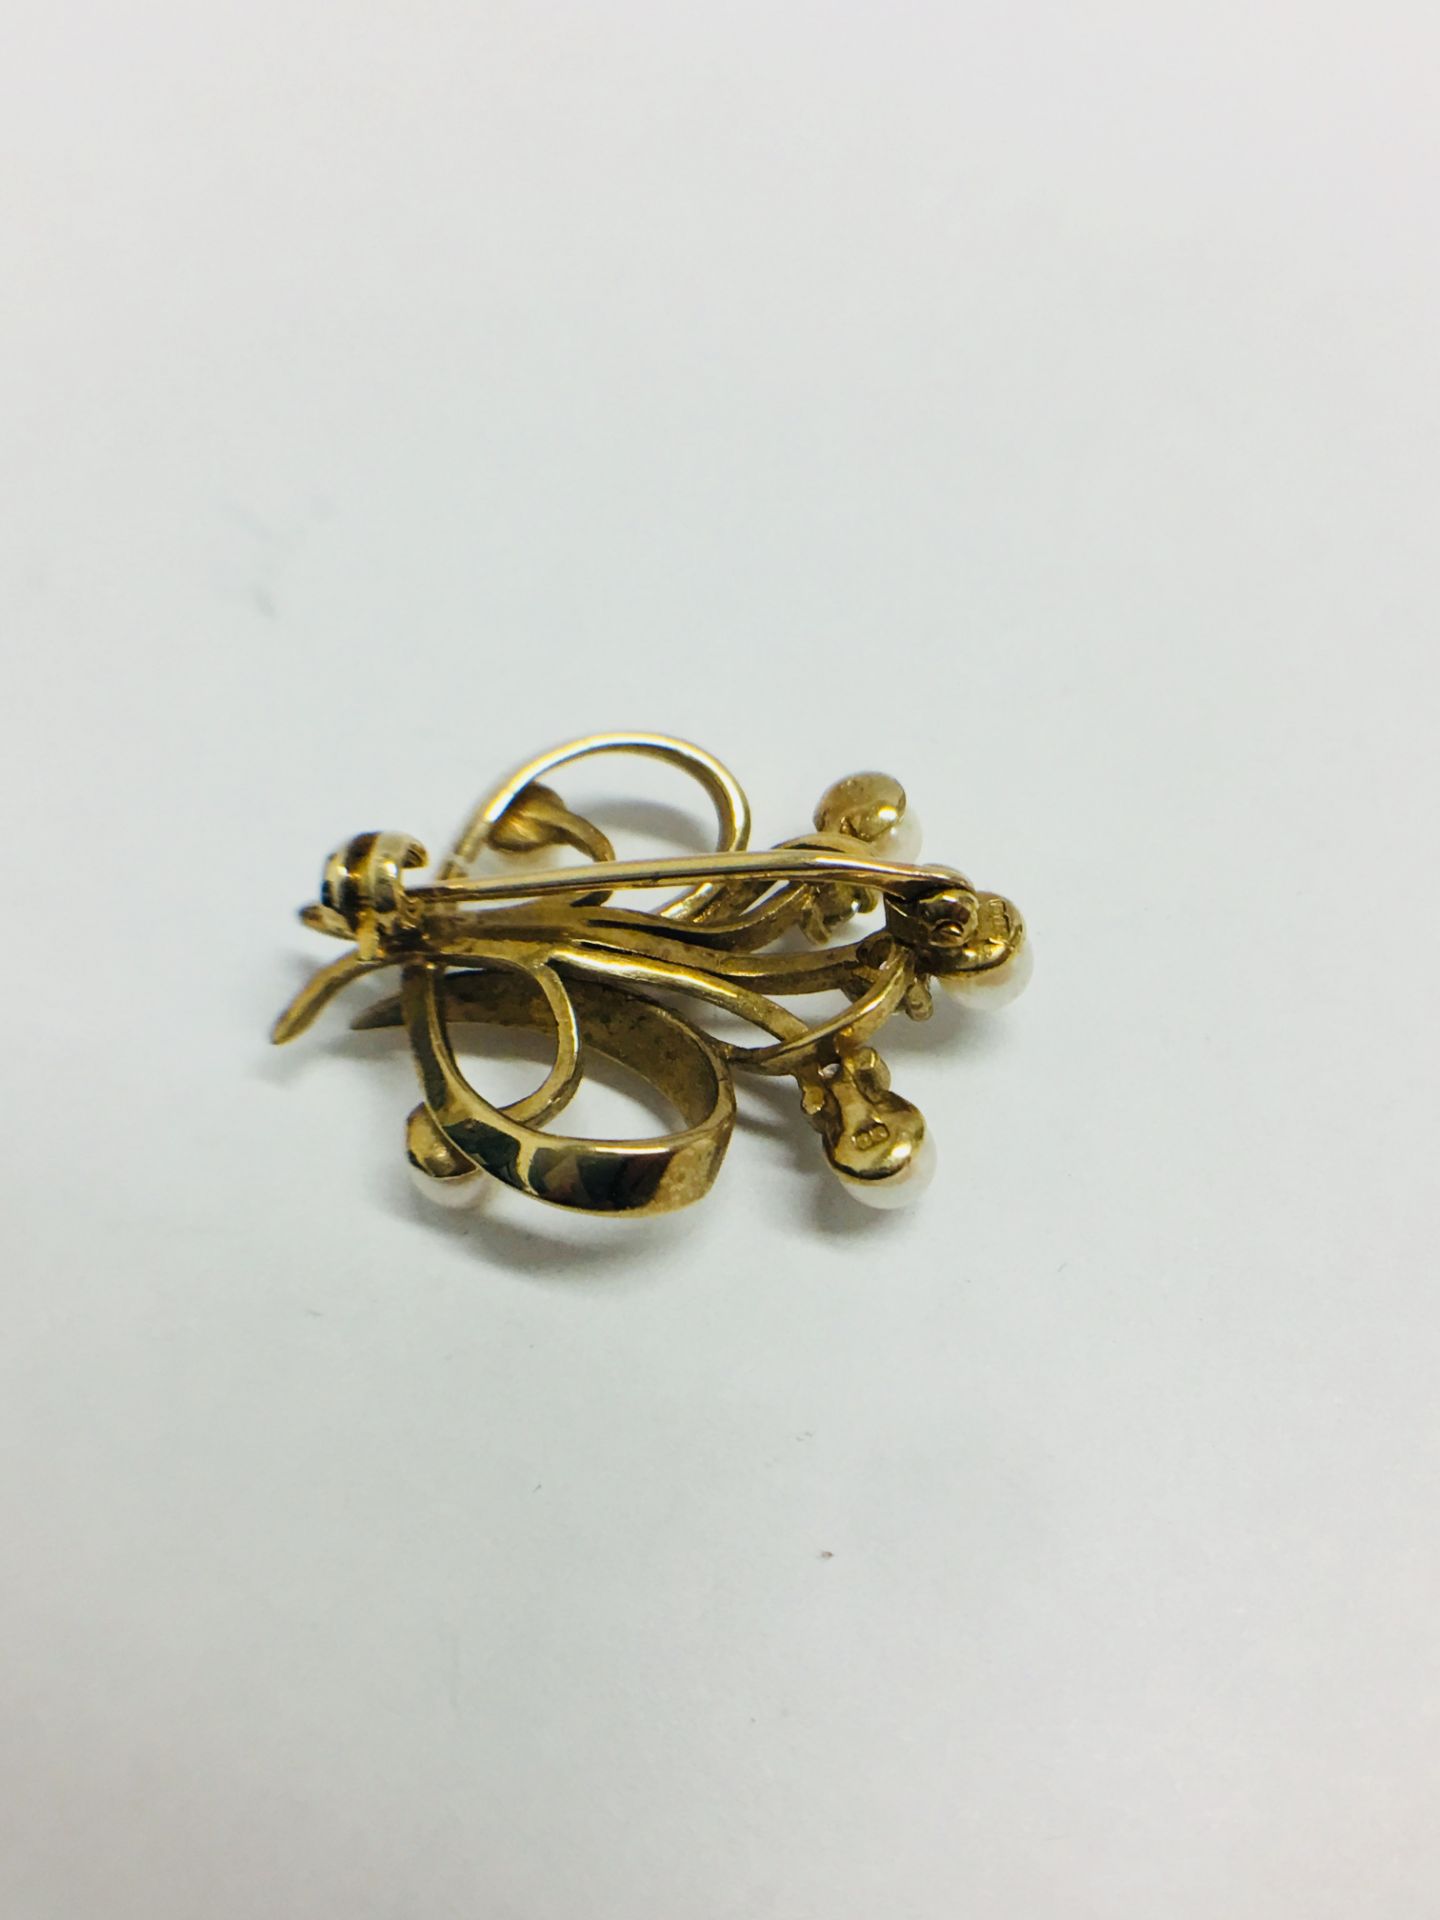 9K Yellow Gold Cultured Pearl and CZ broach - Image 2 of 6